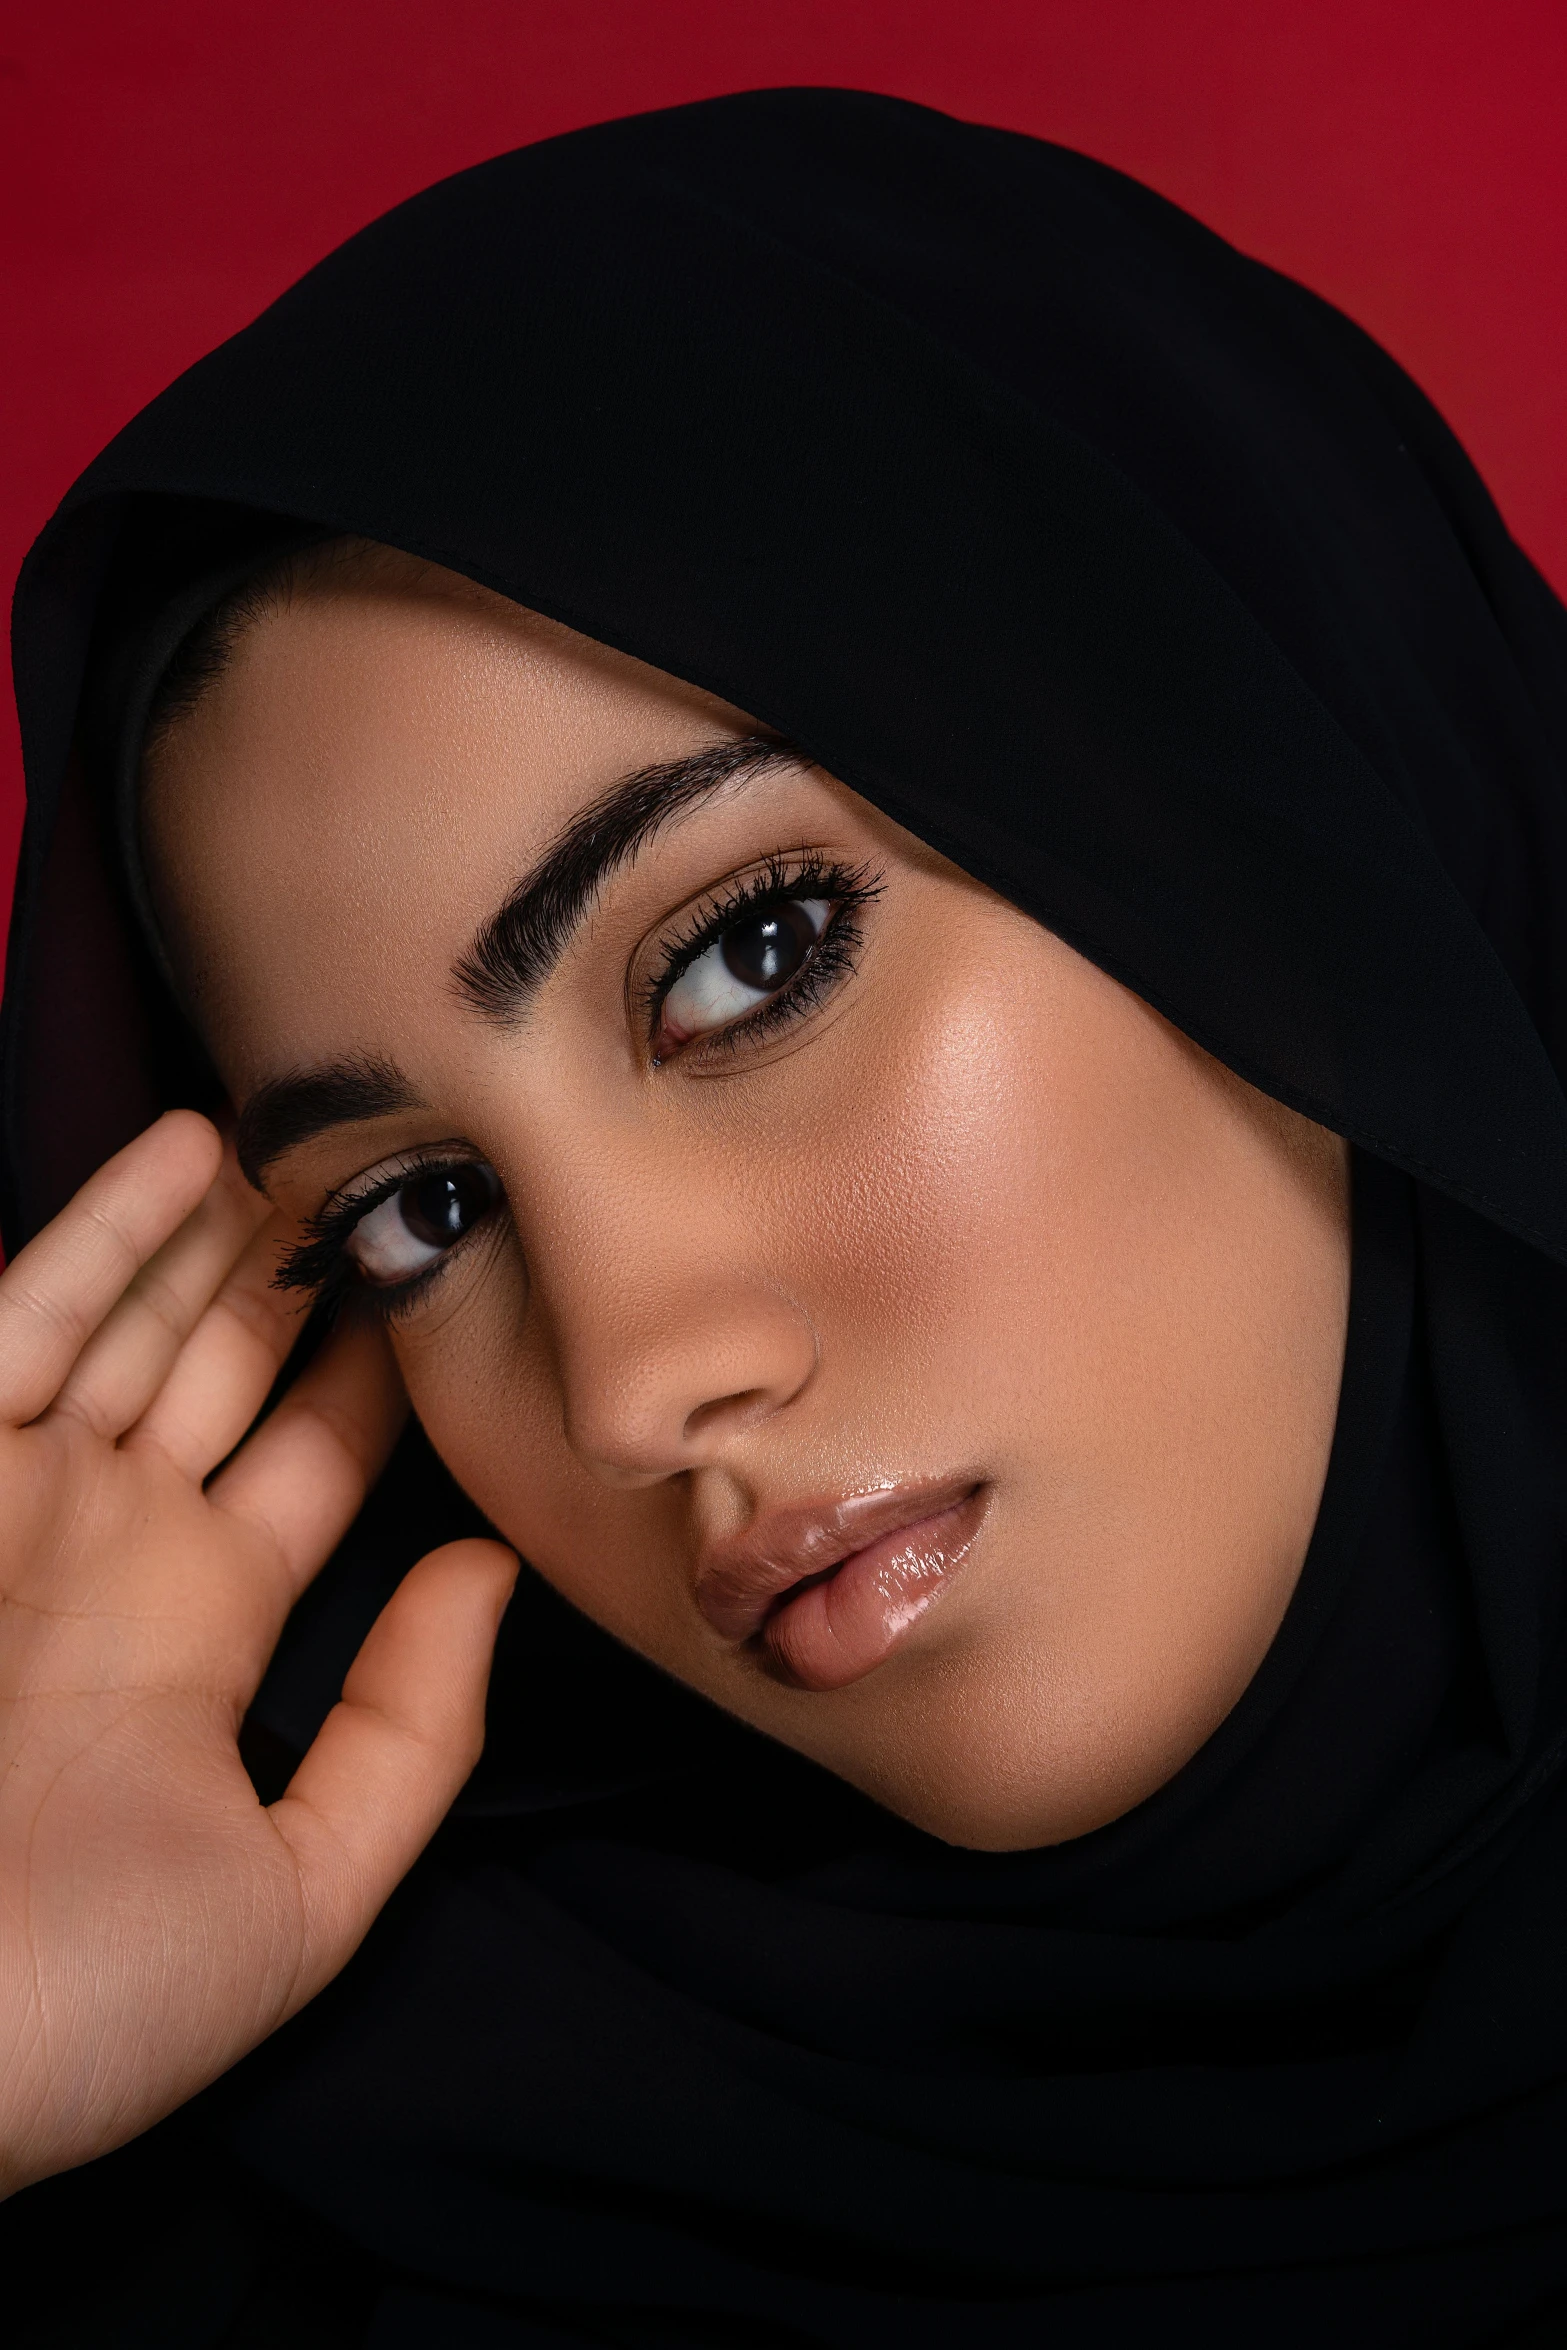 a close up of a person wearing a black head scarf